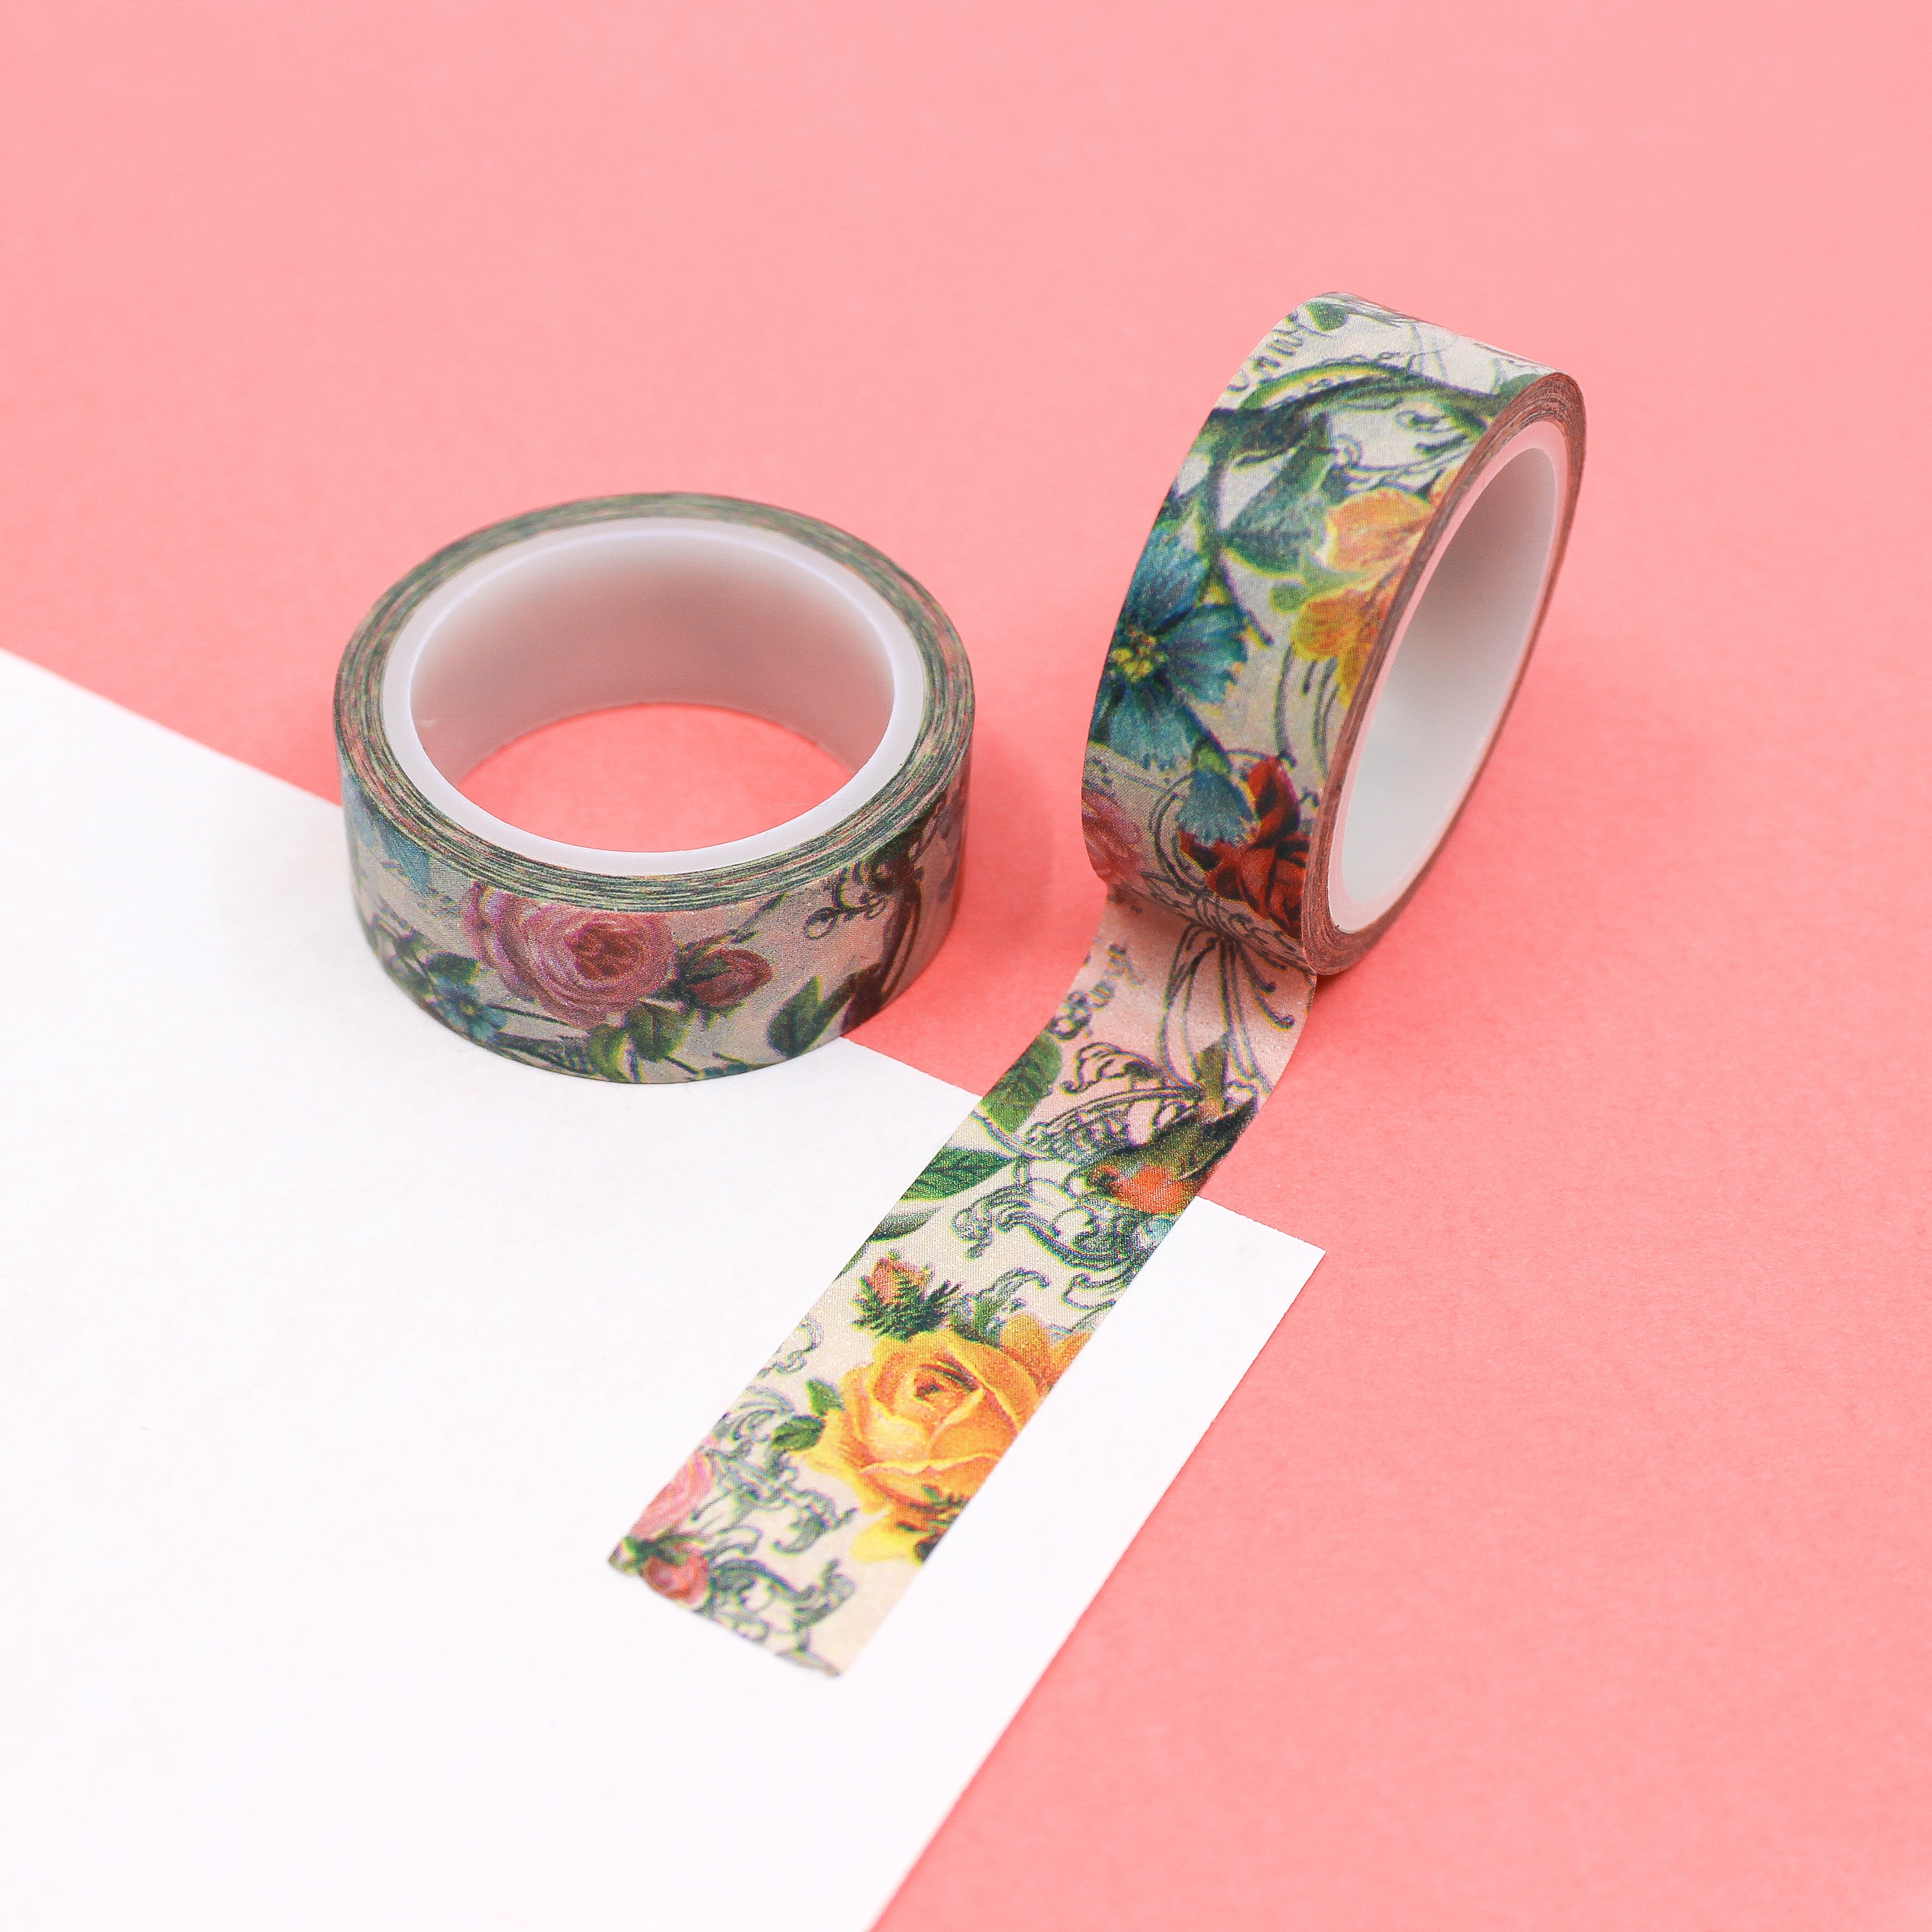 This is a colorful Victorian flower  themed washi tape from BBB Supplies Craft Shop